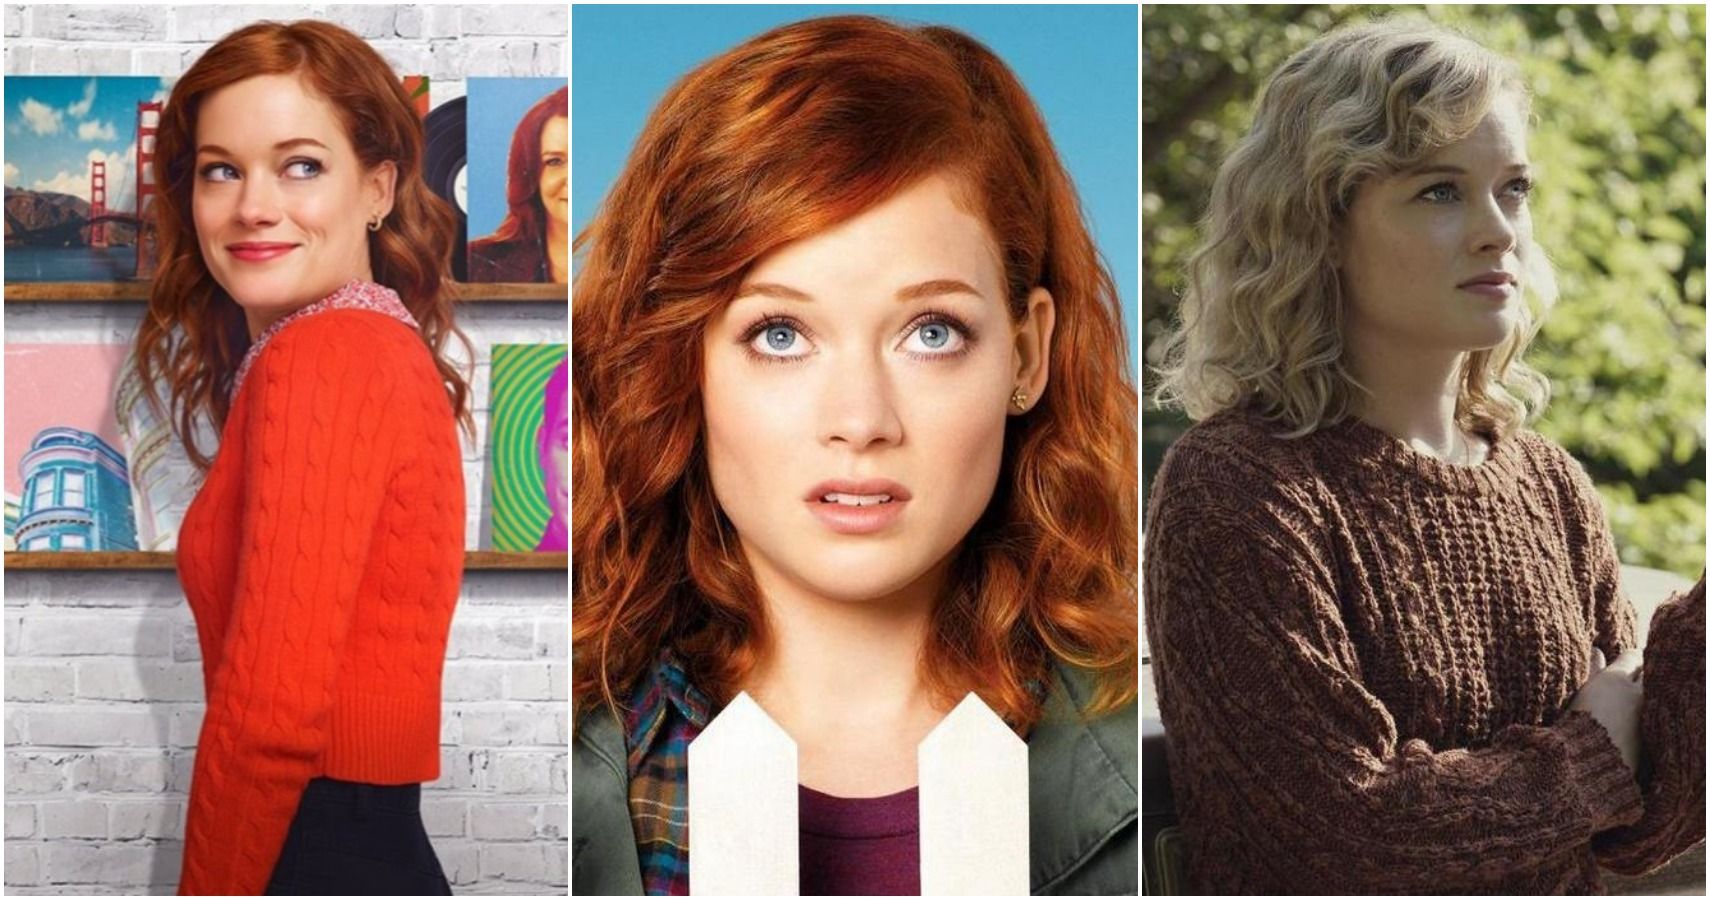 Jane Levy’s 10 Best Movies & TV Shows According To IMDb